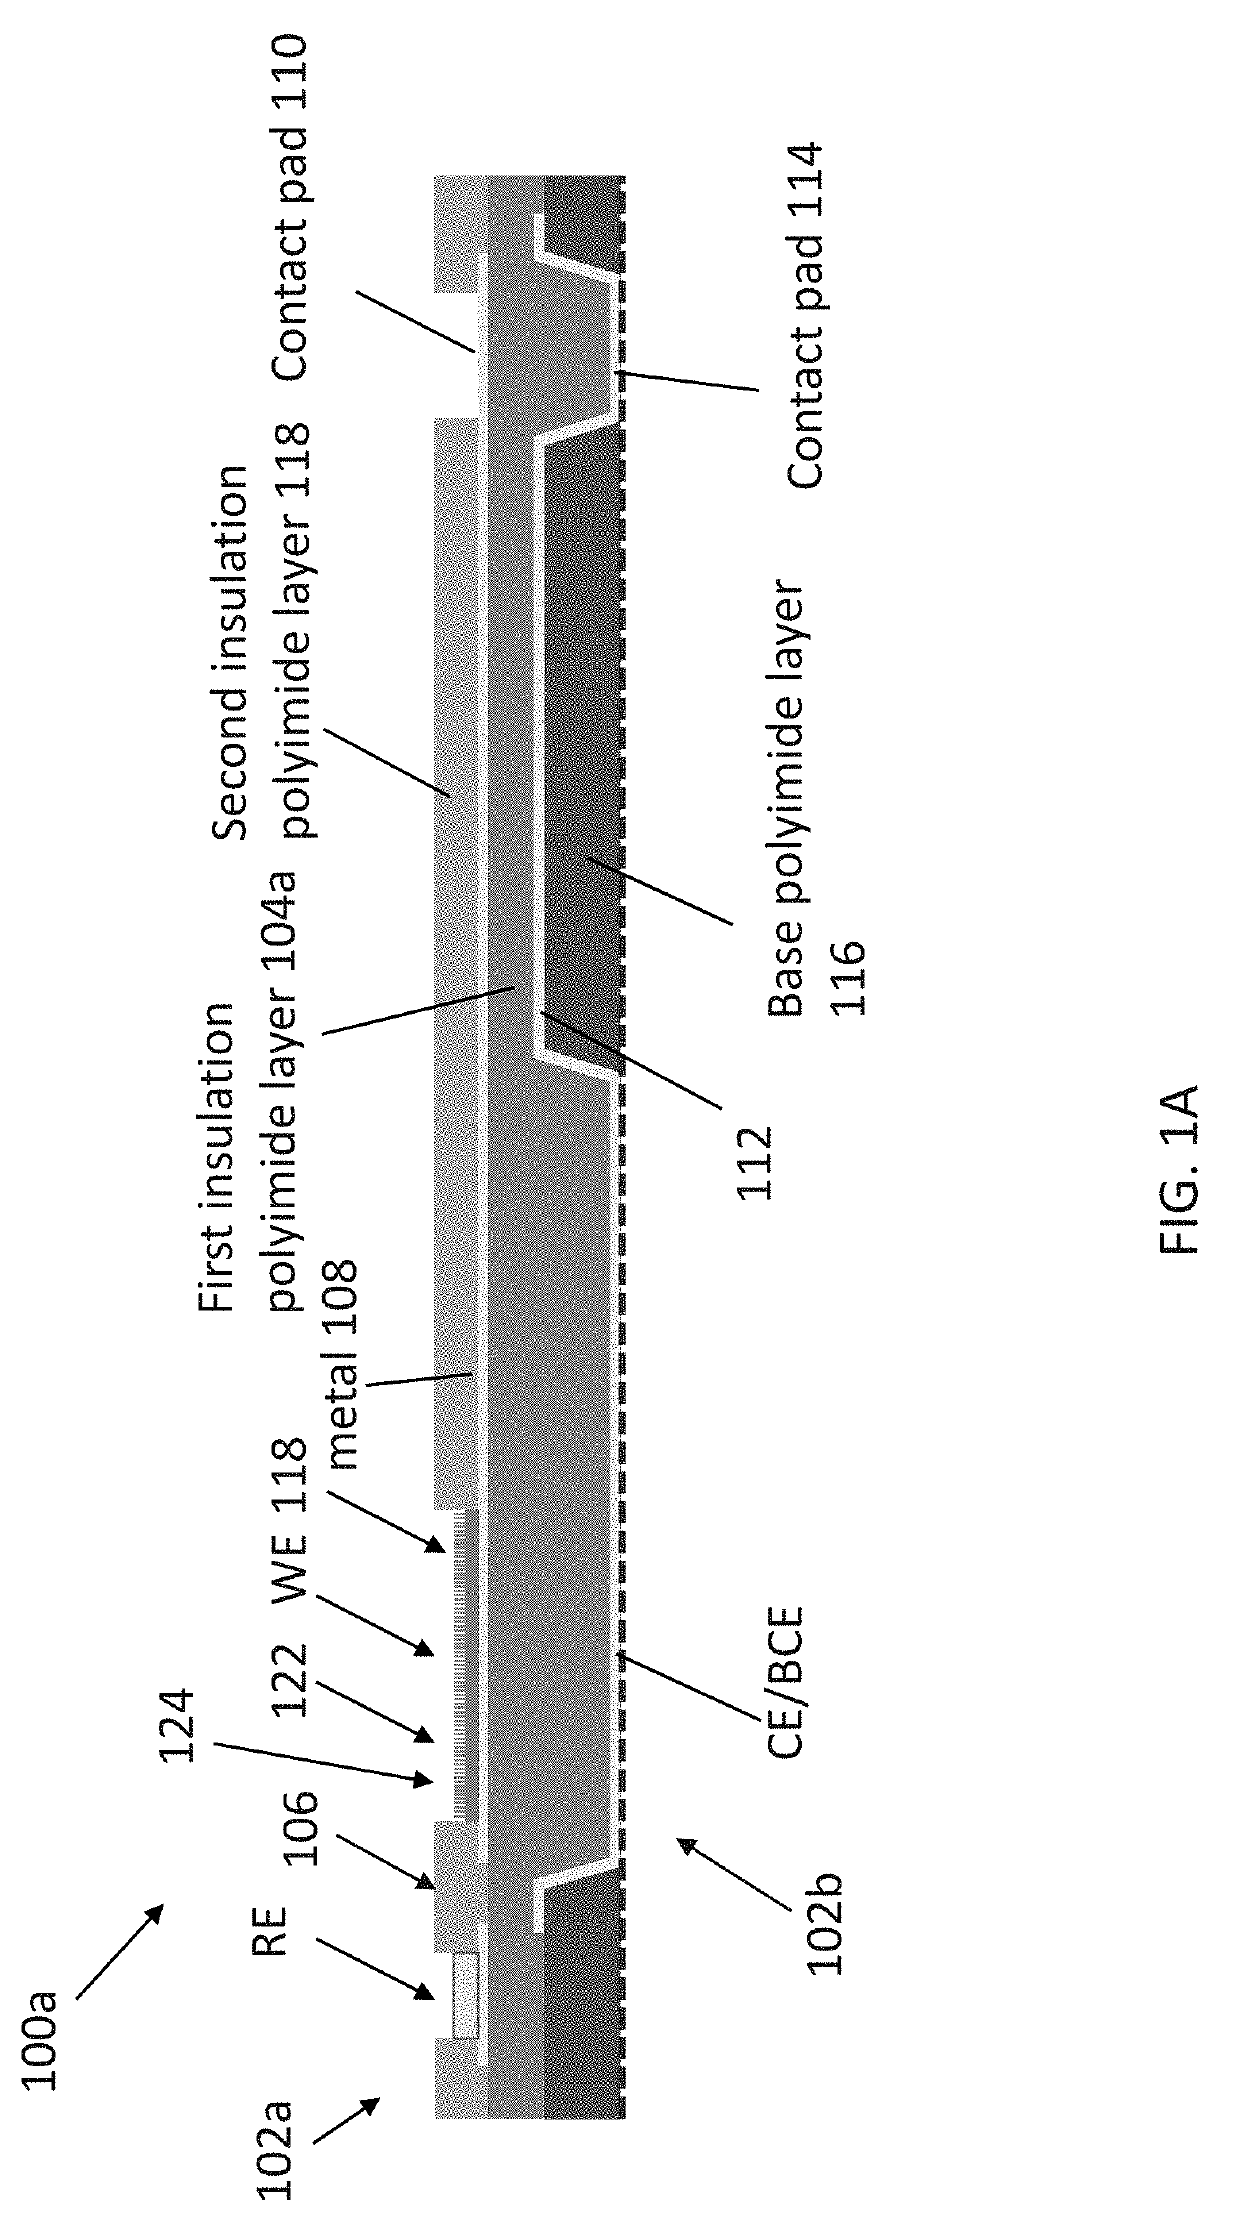 Methods for controlling physical vapor deposition metal film adhesion to substrates and surfaces